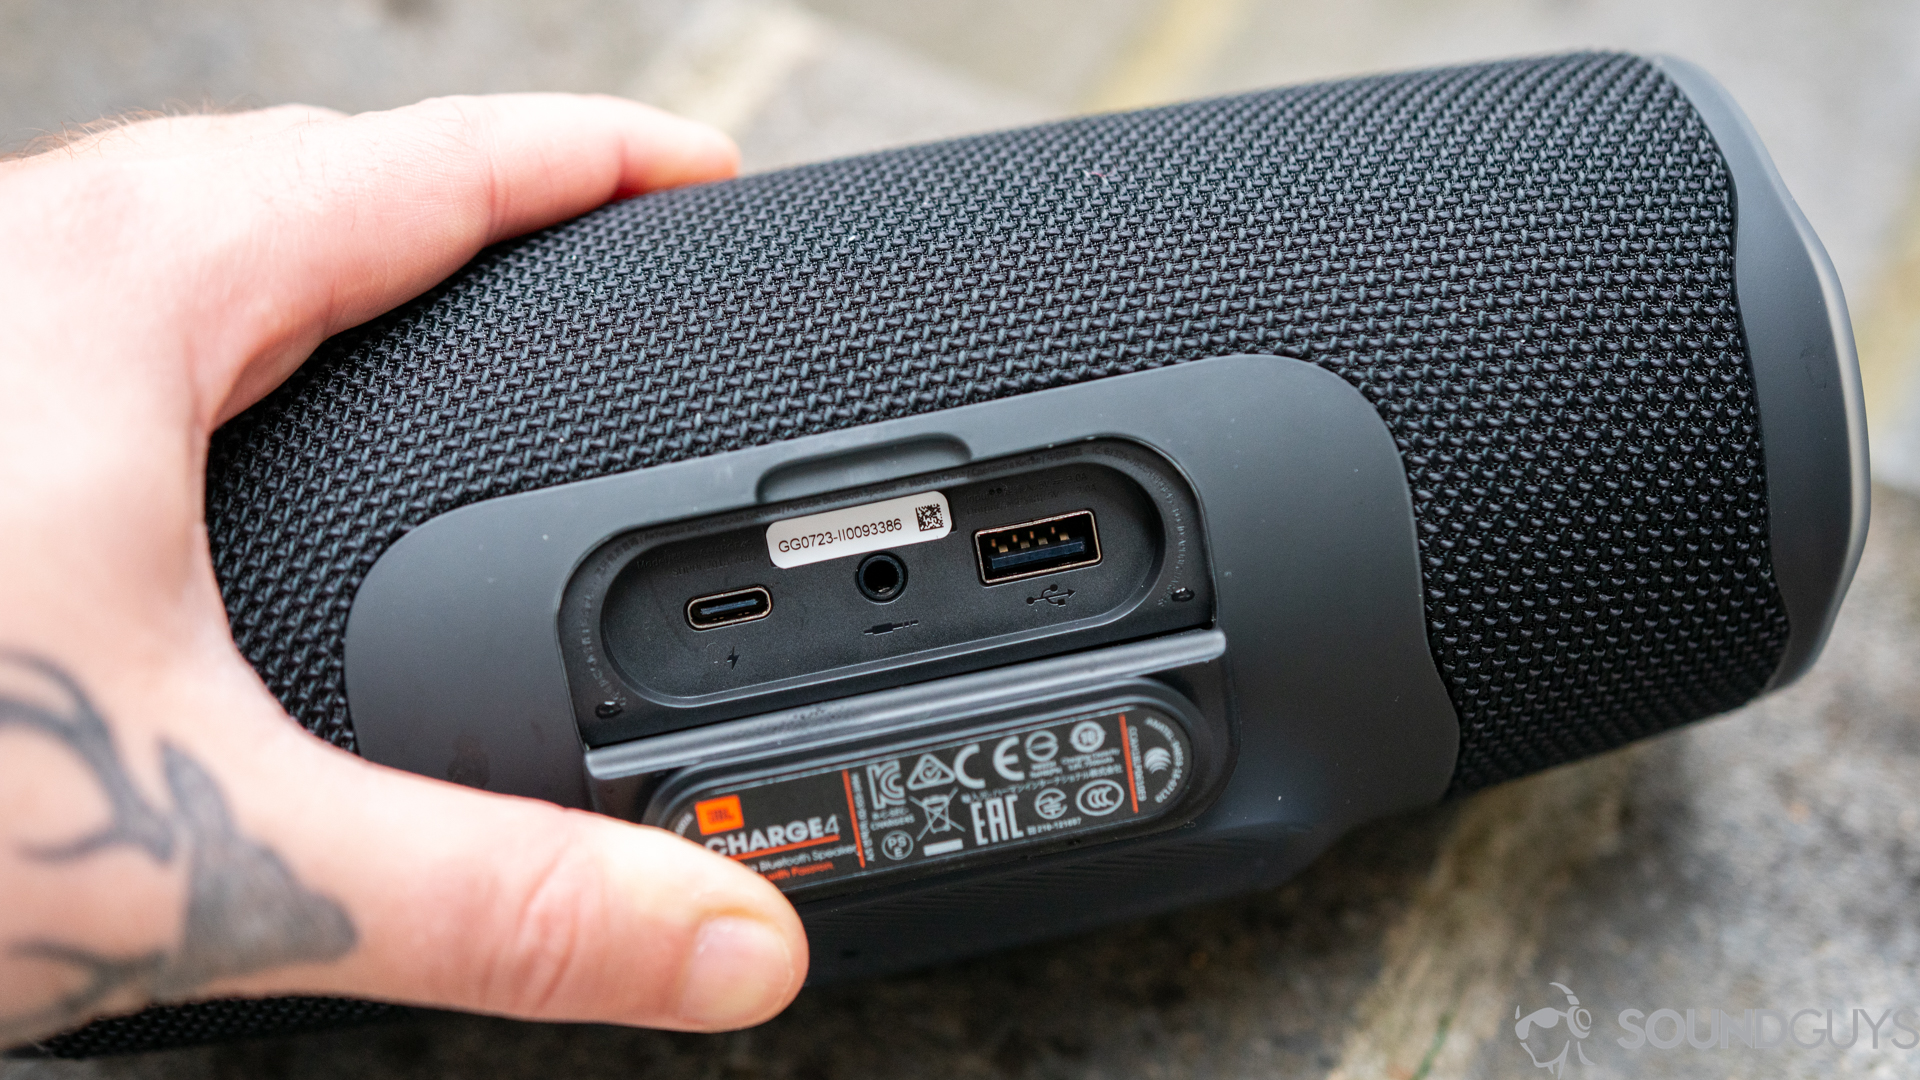 Pictured is the USB-C, 3.5mm input, and USB output on the JBL Charge 4 review unit